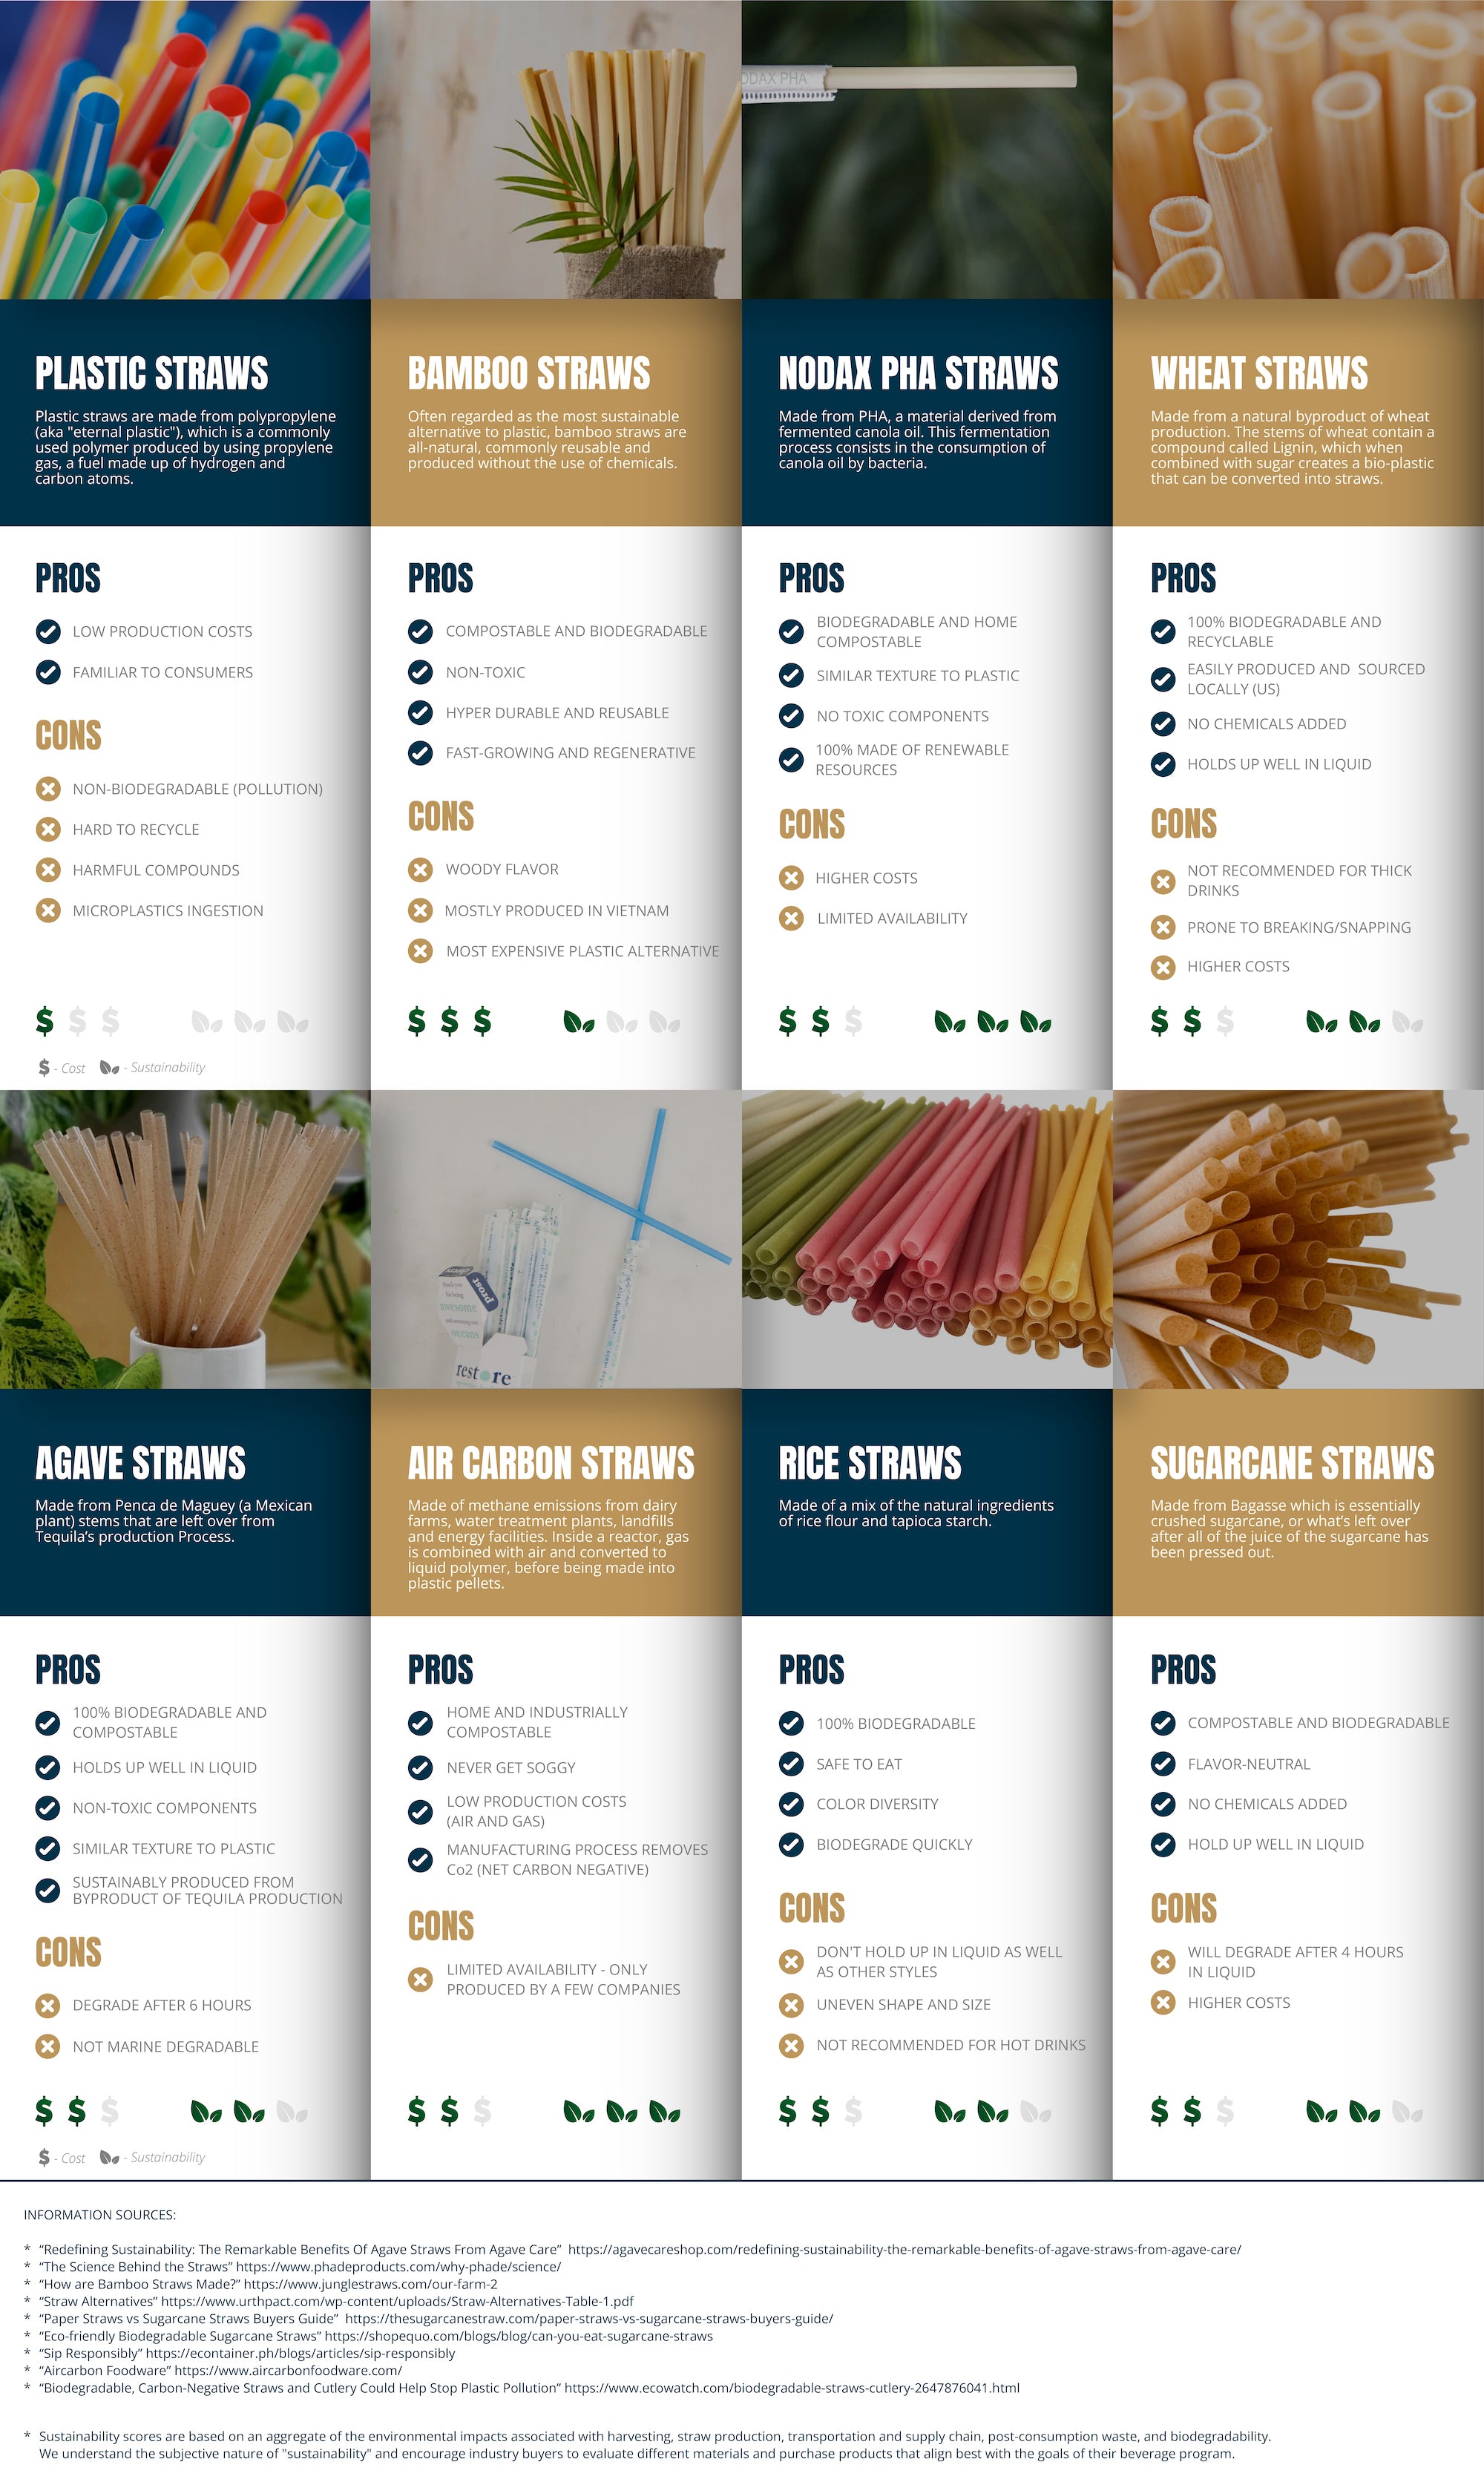 Eco Straws Infographic Comparing Bamboo Straws, Agave Straws, and Plastic Straw Alternatives